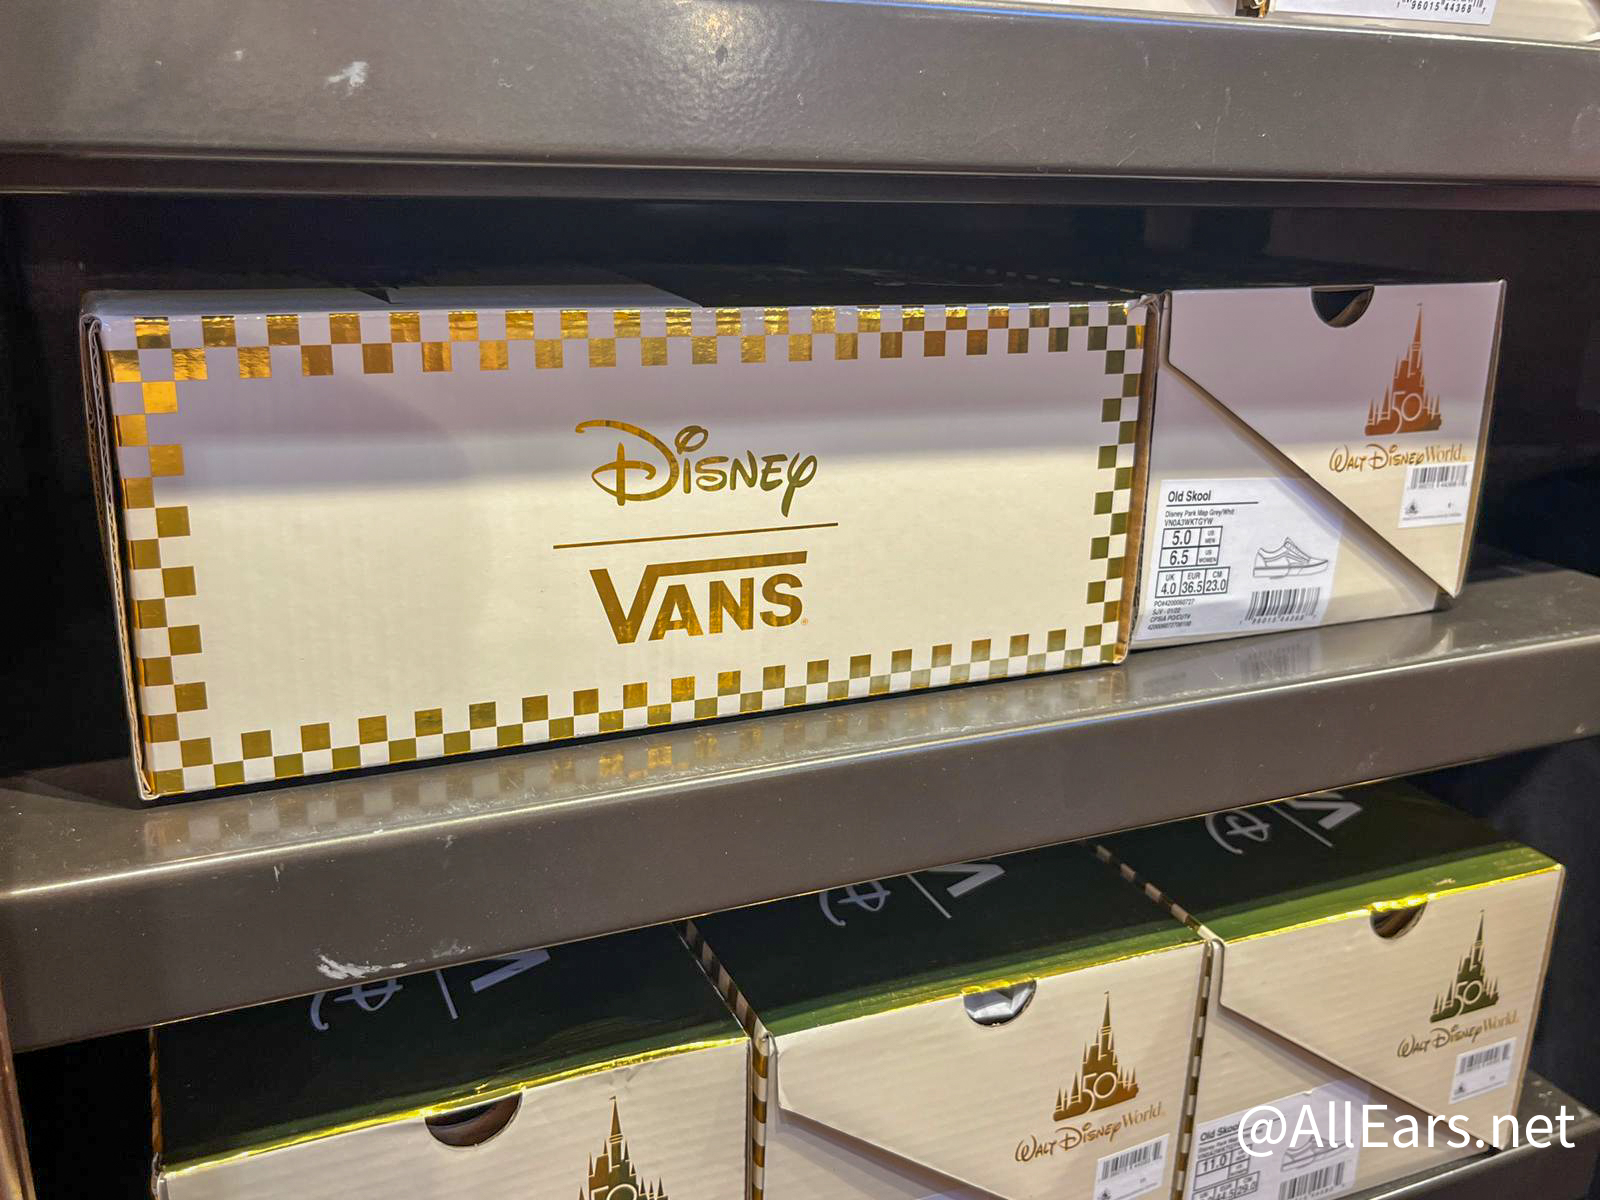 New 50th Anniversary Vans Are Now In Disney World - AllEars.Net